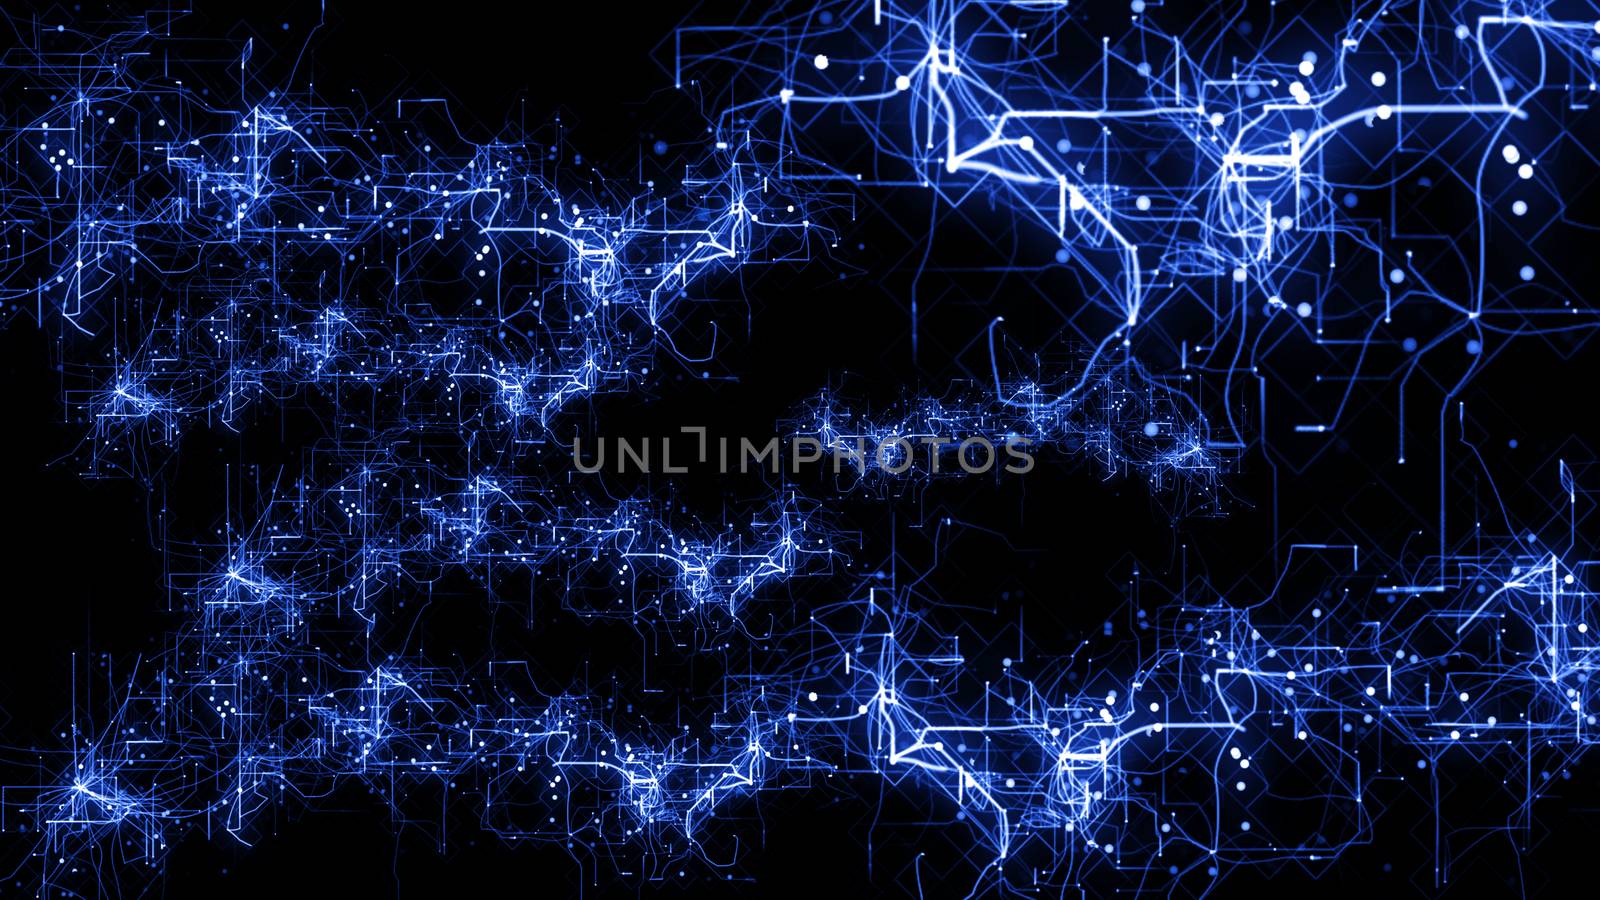 Arty 3d illustration of sparkling plazma cluster in the dark blue and black background with numerous spots and twisting lines. It looks futuristic and psychedelic.